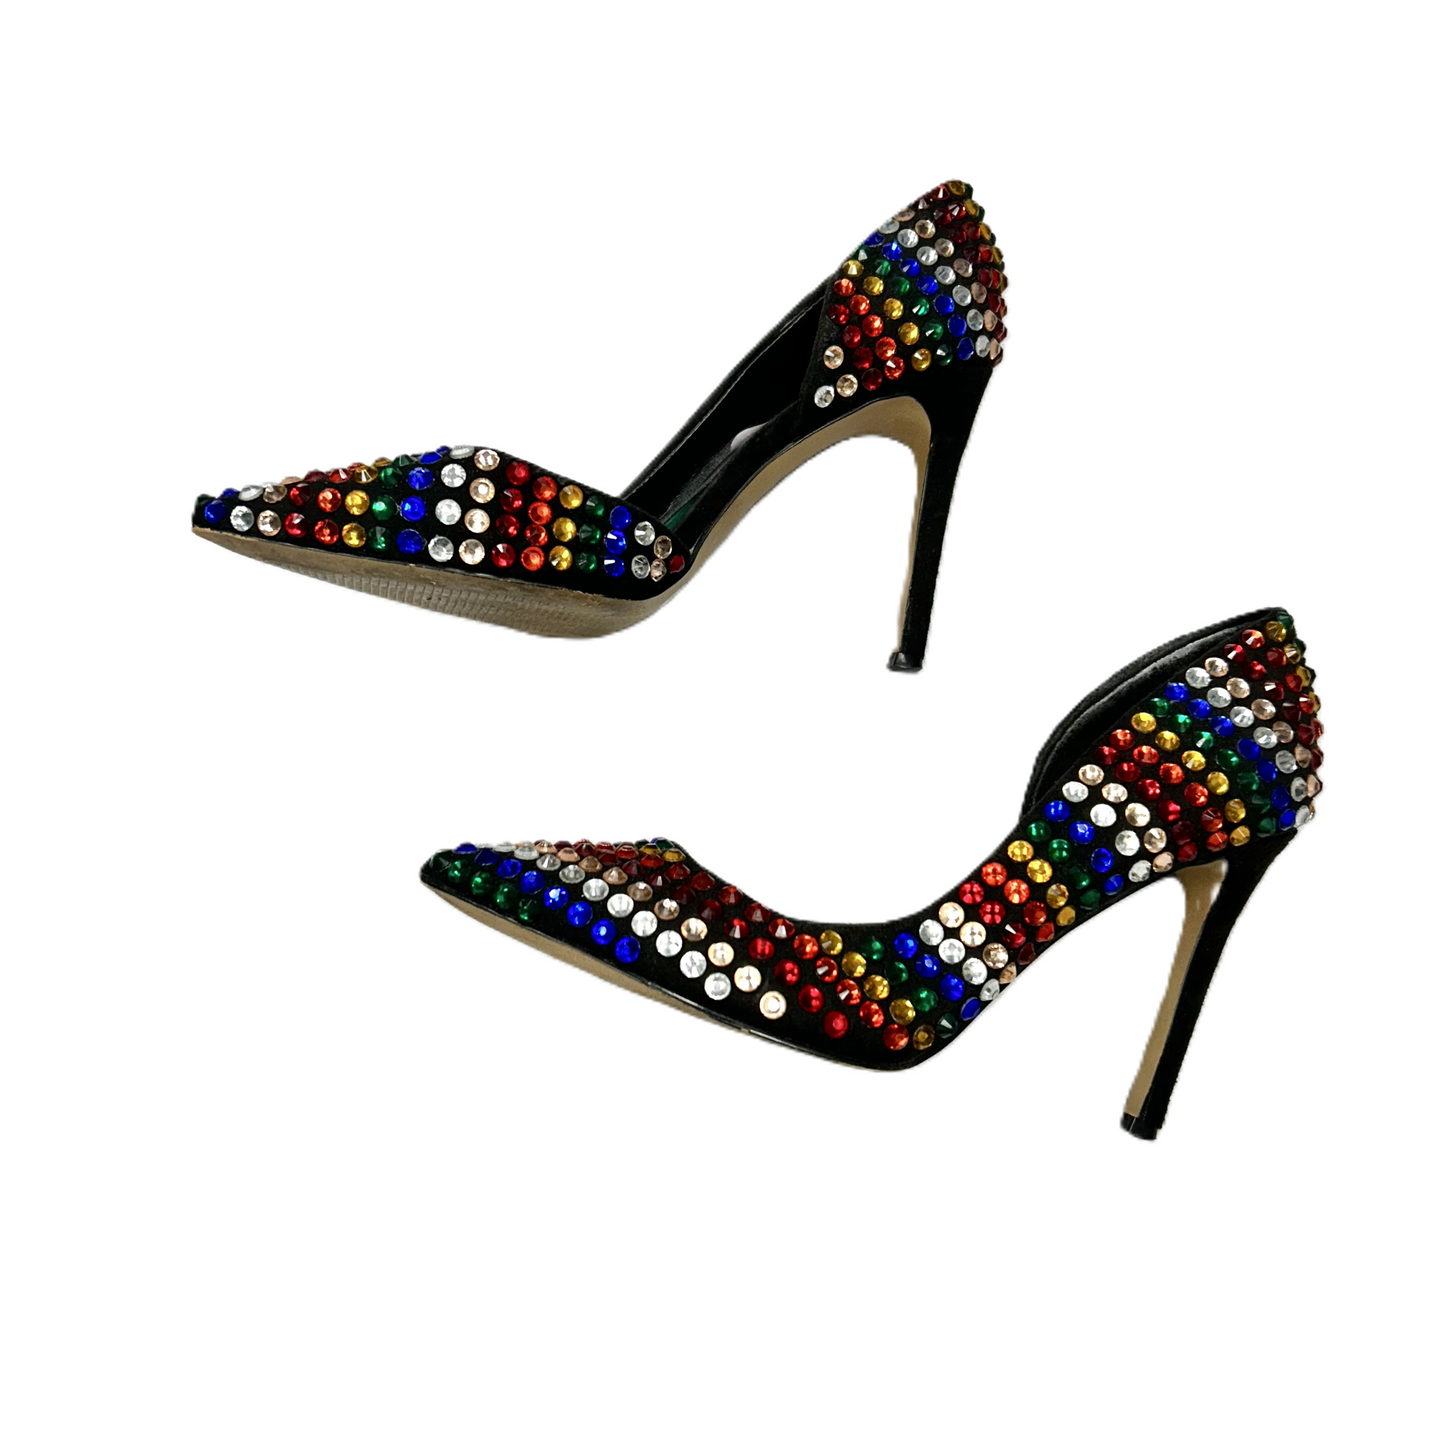 Rainbow Print Shoes Heels Stiletto By Inc, Size: 5.5